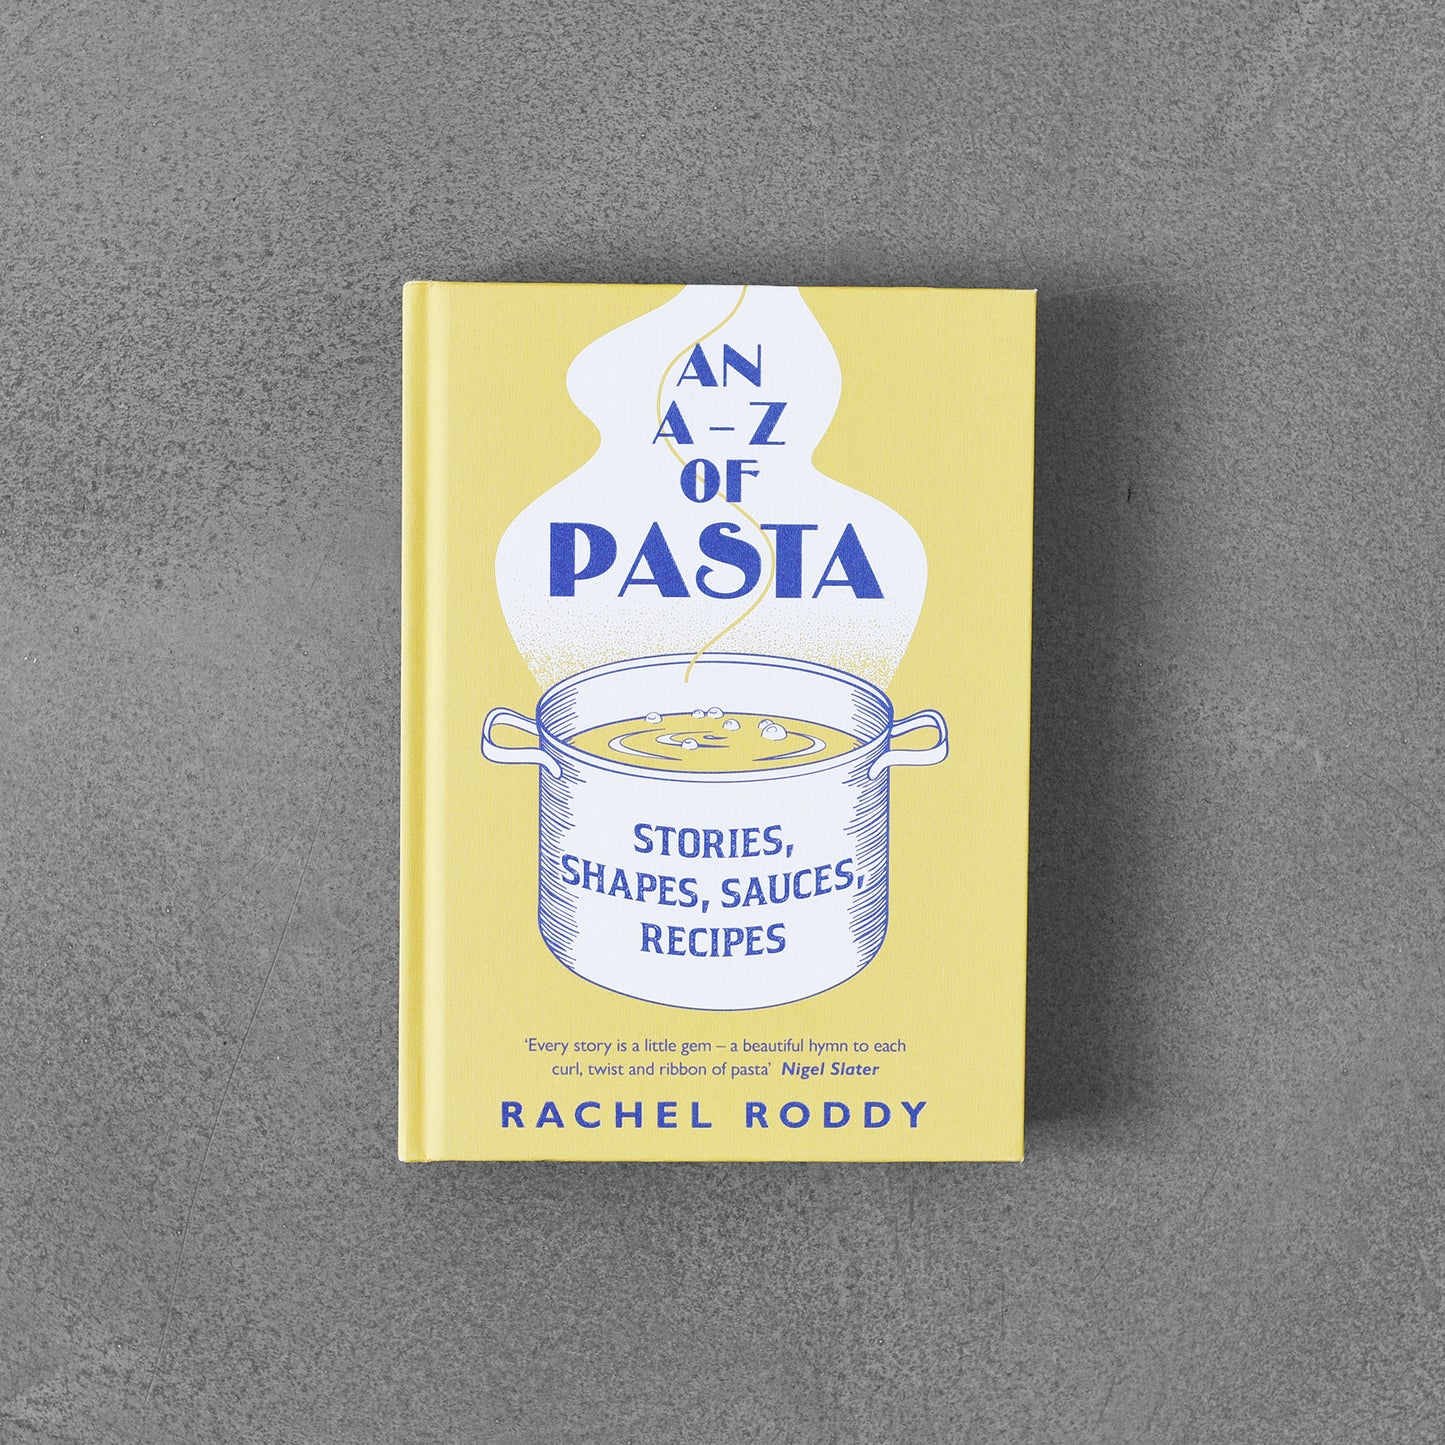 A-Z of Pasta : Stories, Shapes, Sauces, Recipes, Rachel Roddy